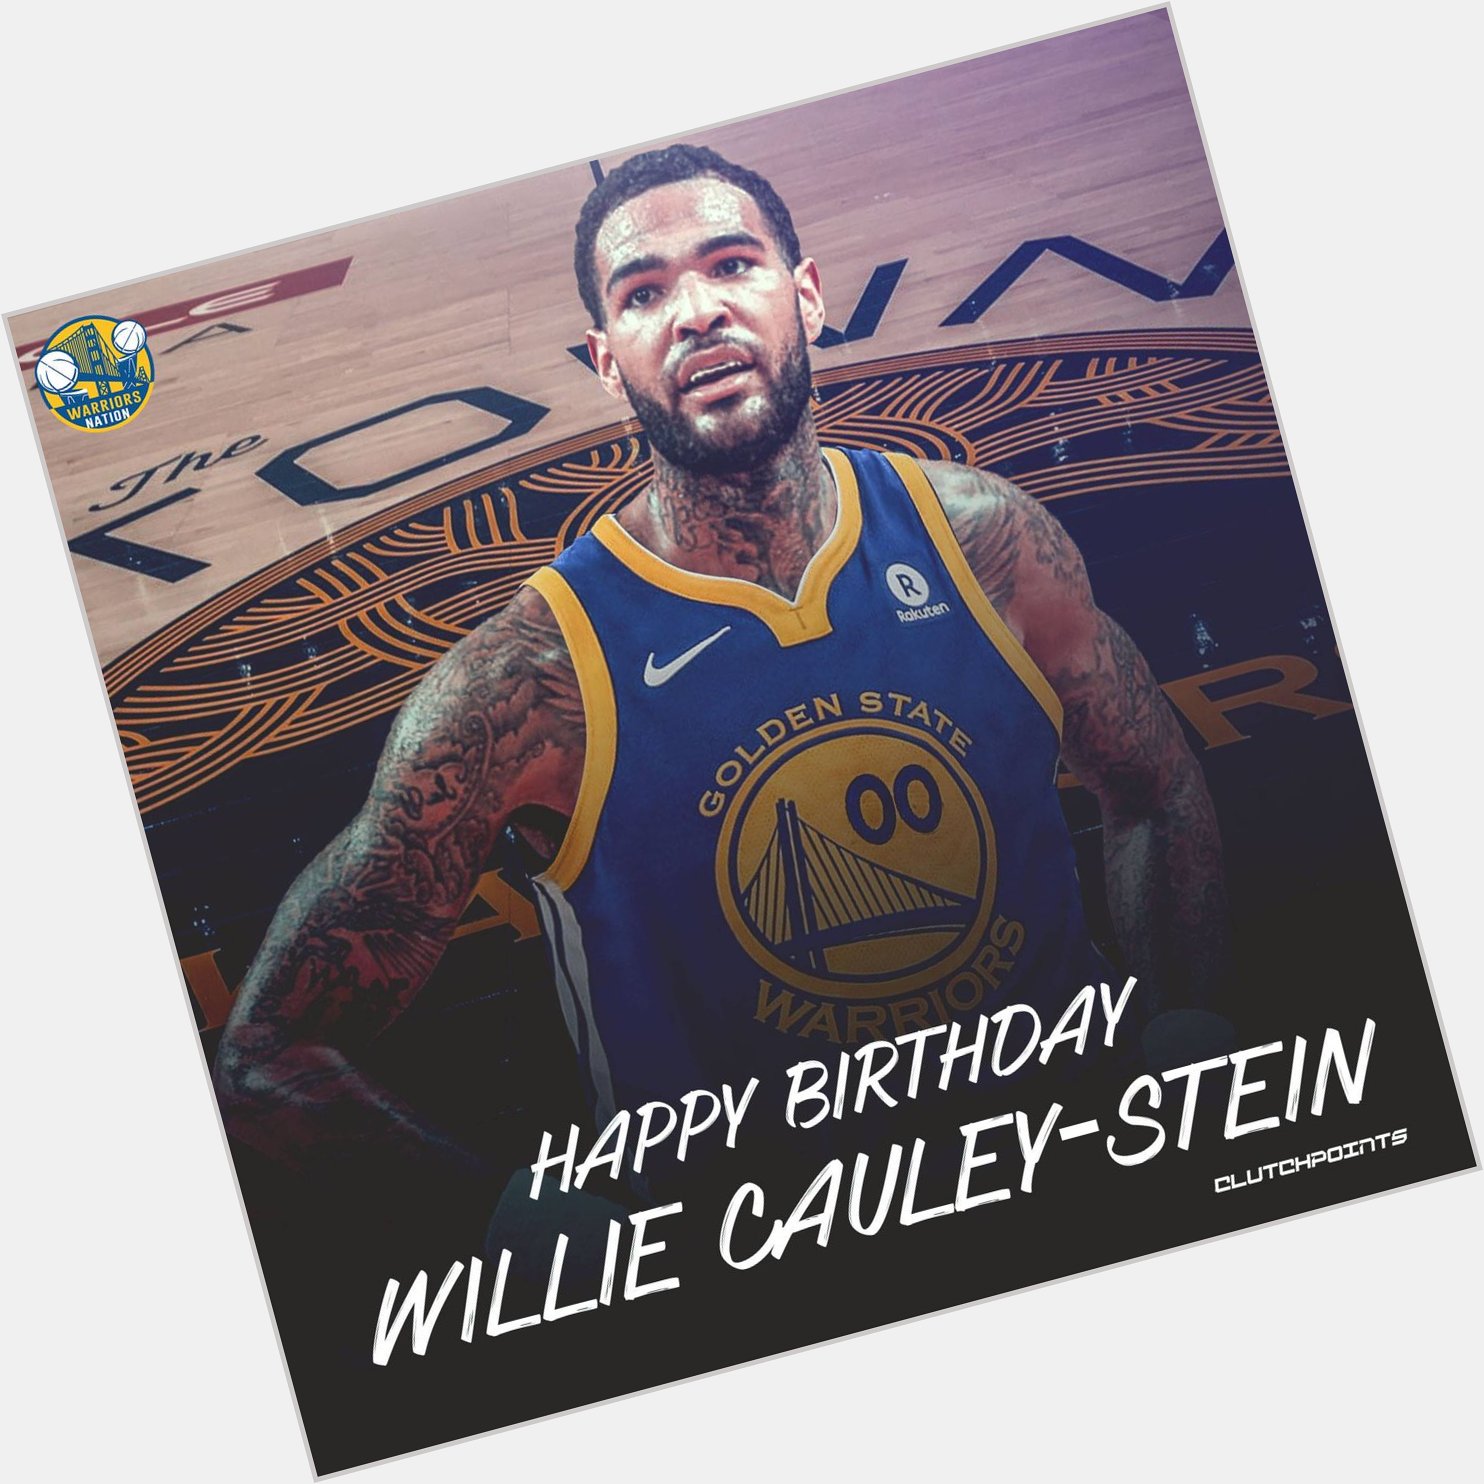 Join Warriors Nation in wishing Willie Cauley-Stein a happy 26th birthday!  